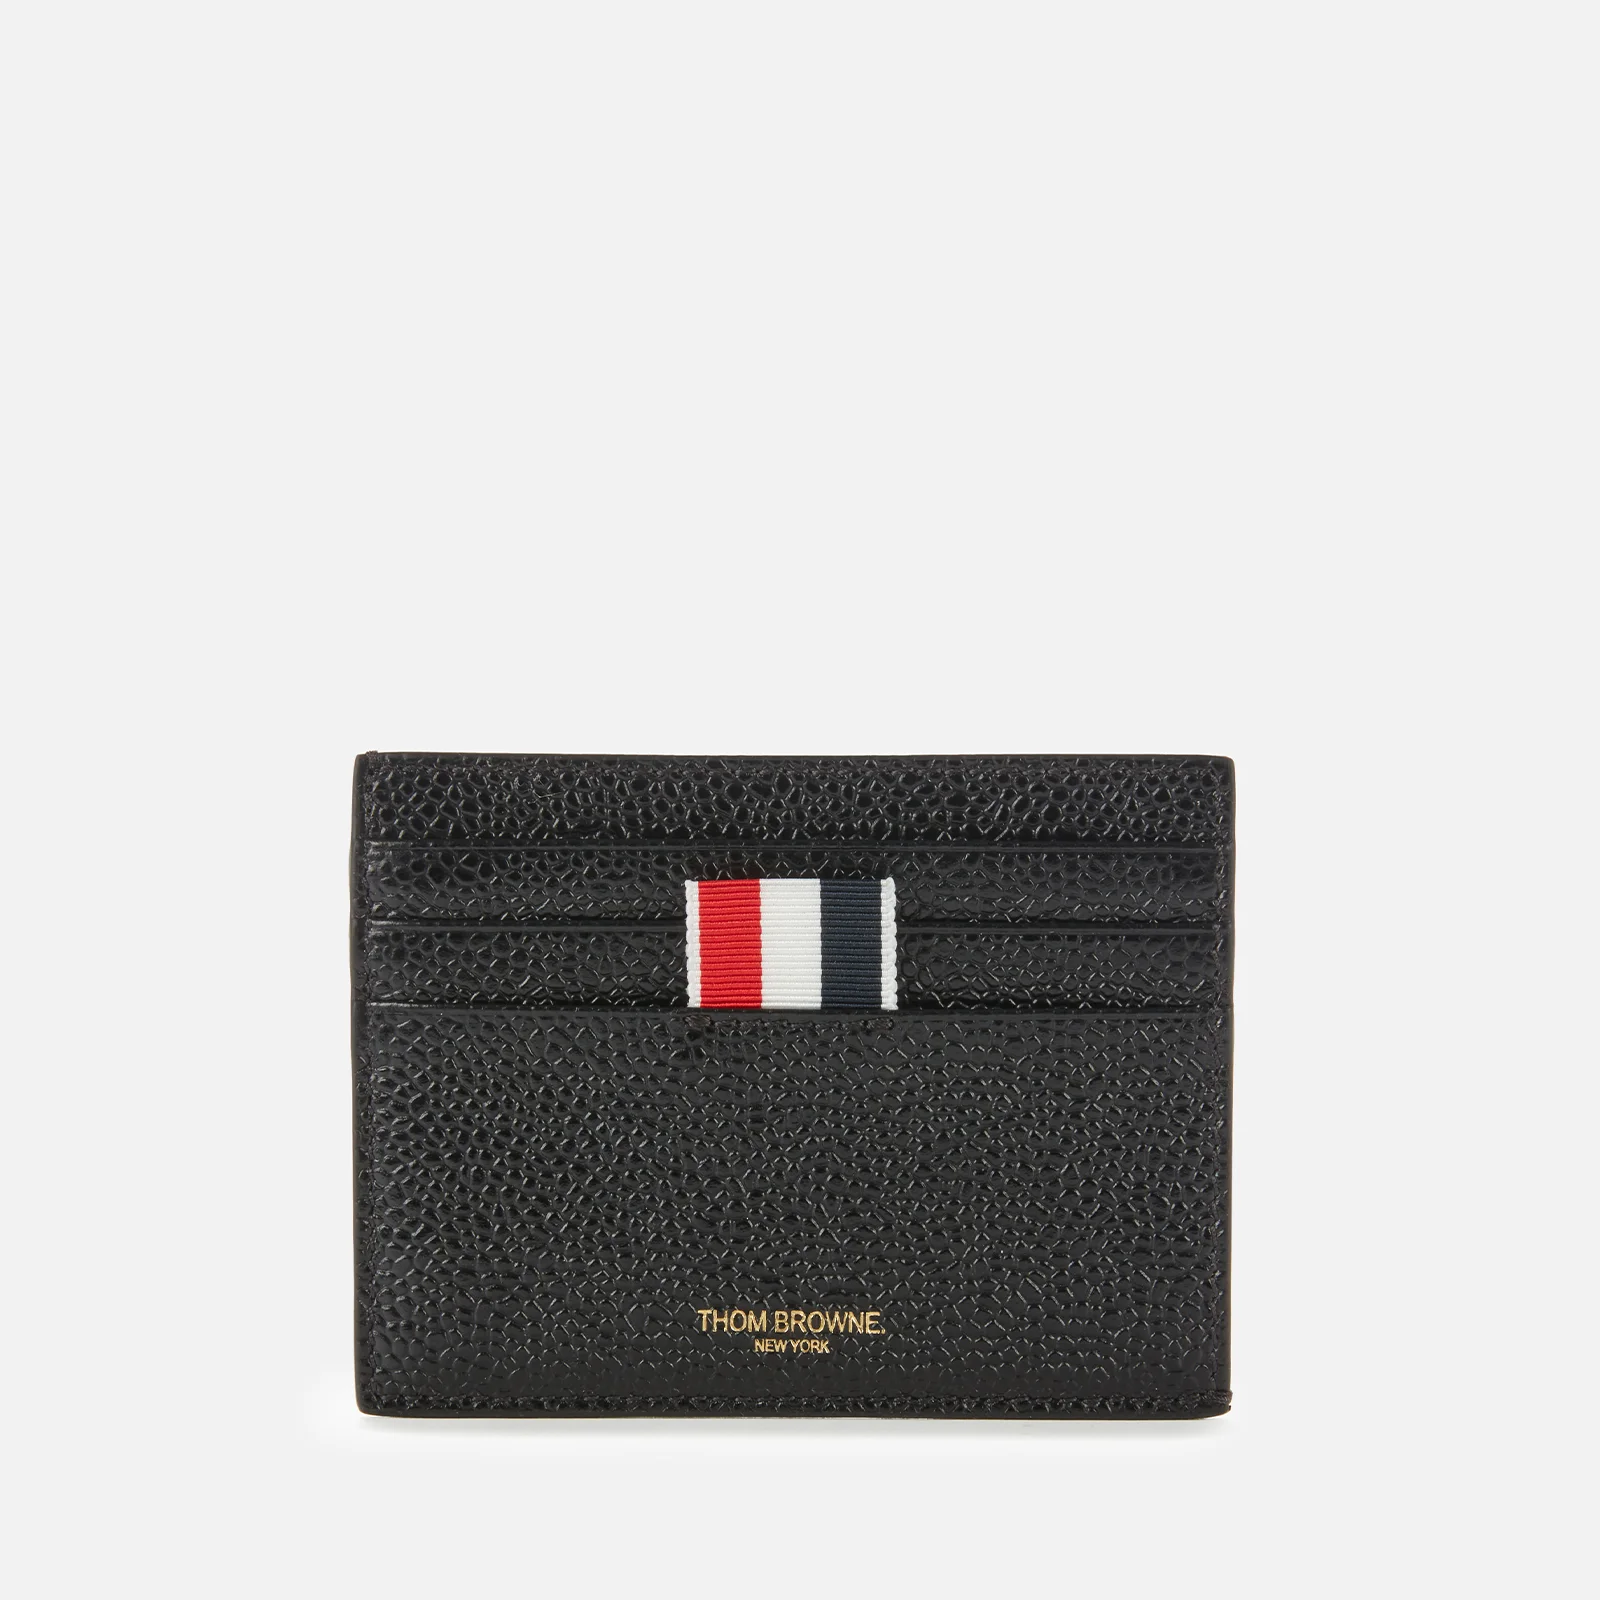 Thom Browne Unisex Card Holder with Note Compartment - Black Image 1